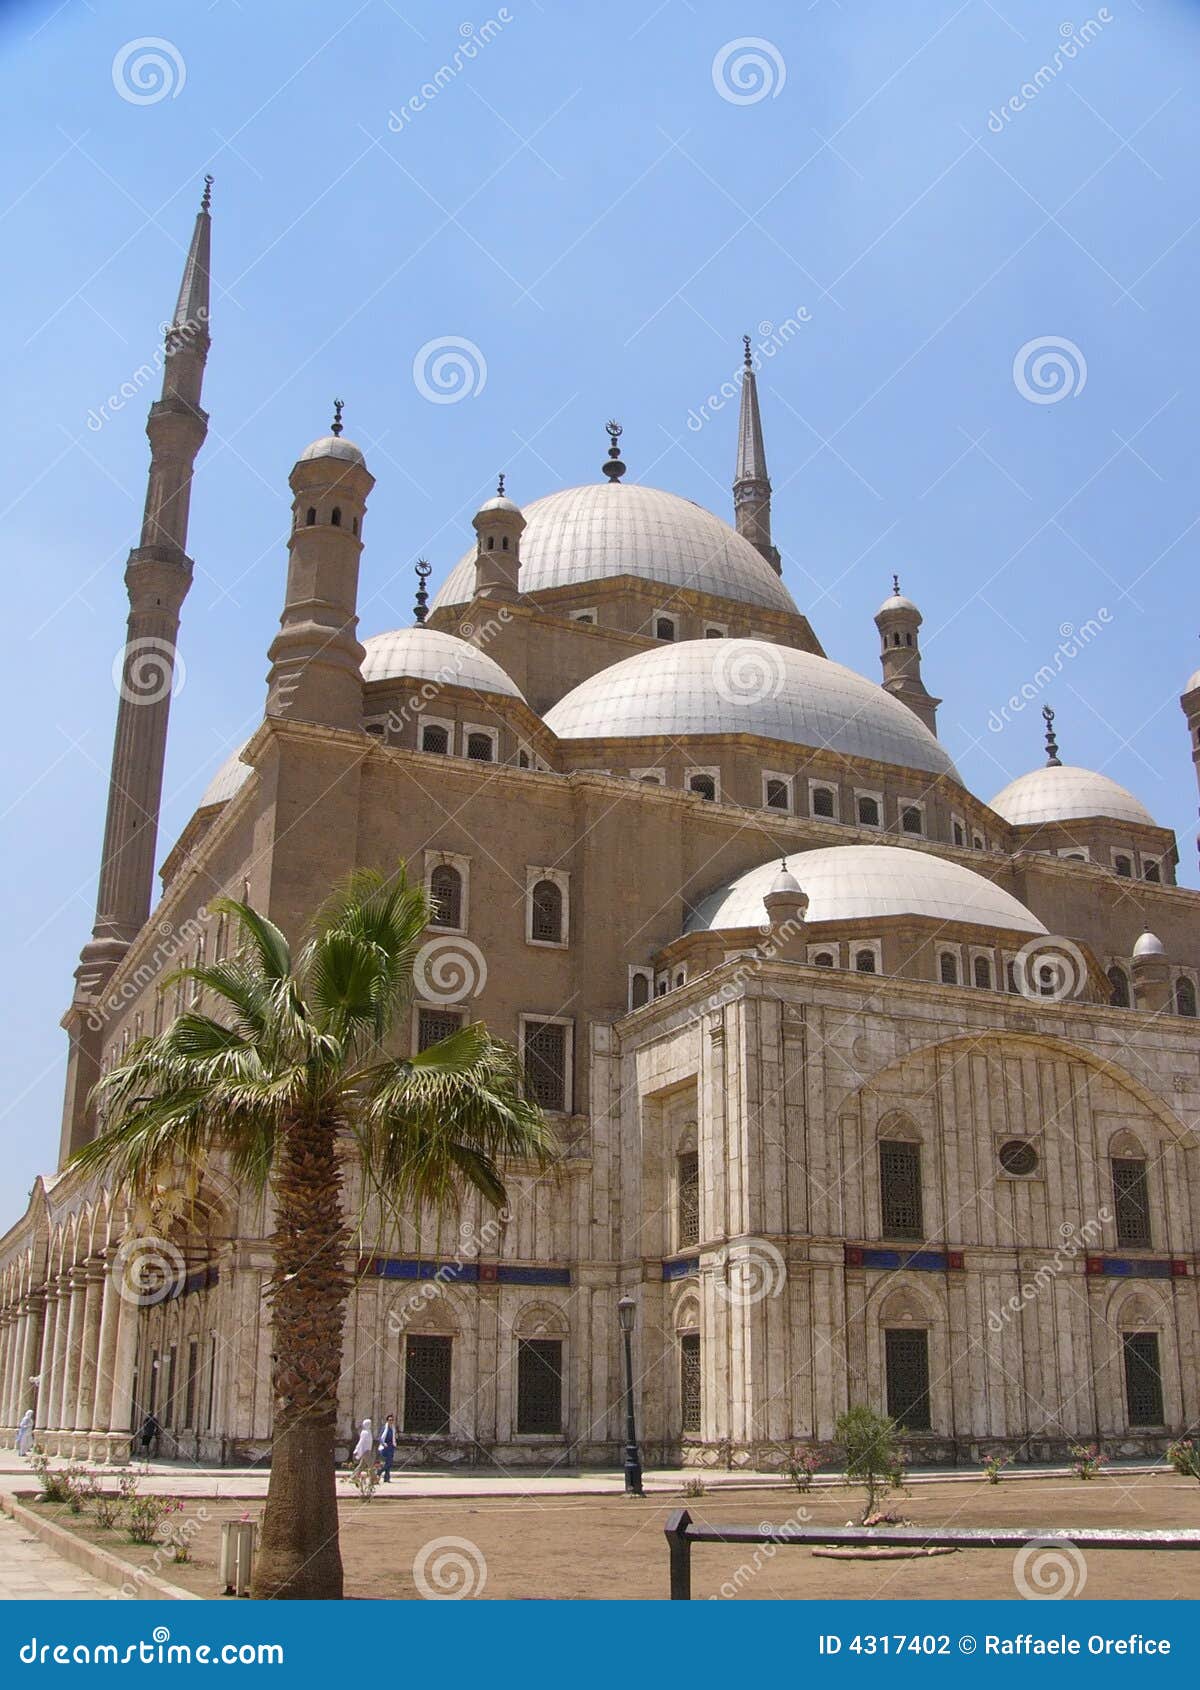 the mohamed al mosque